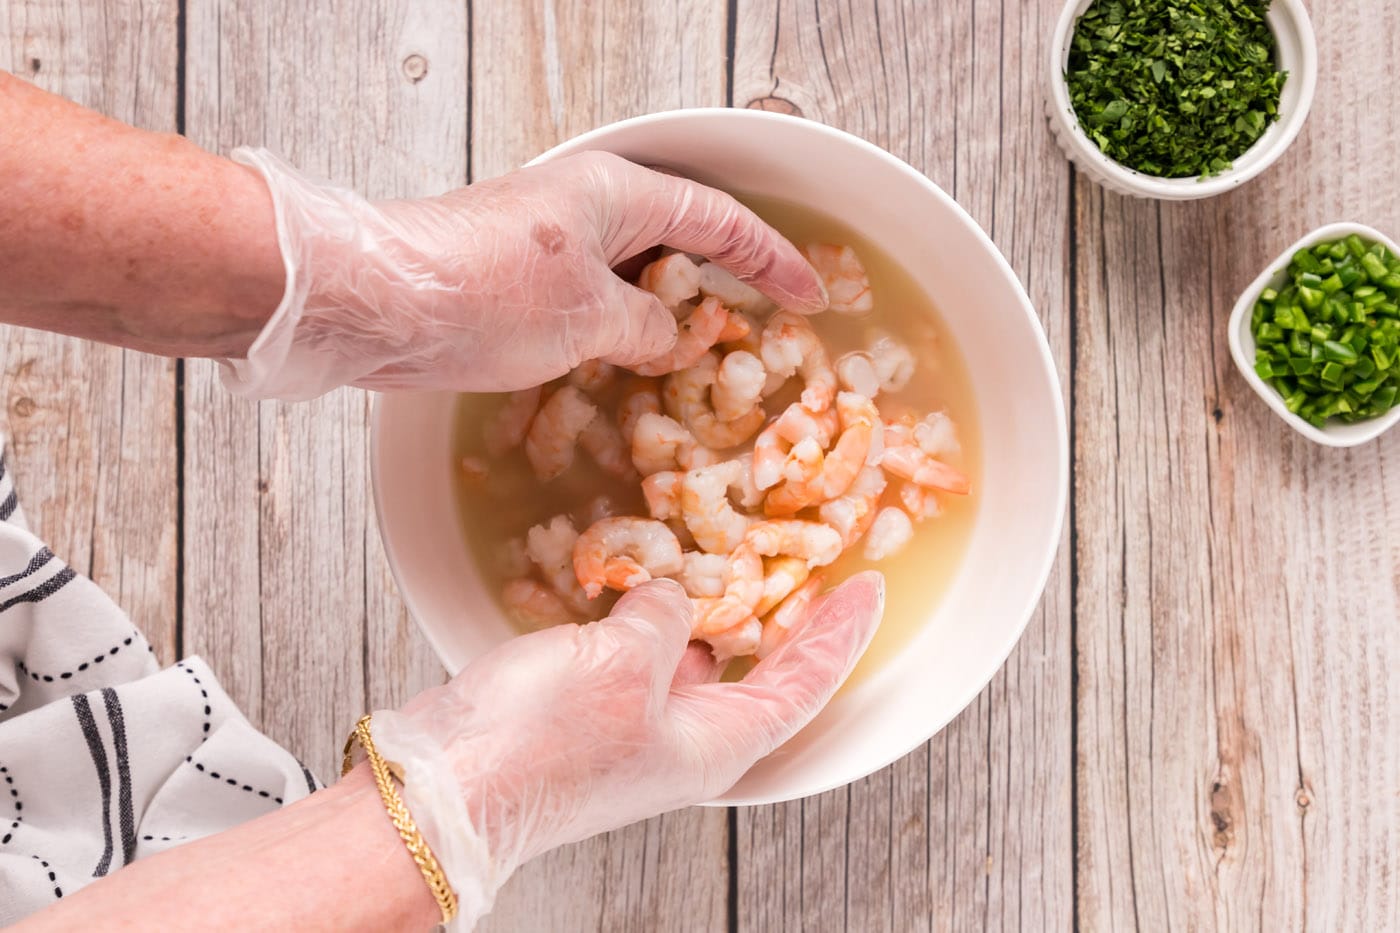 tossing shrimp in lemon and lime juices